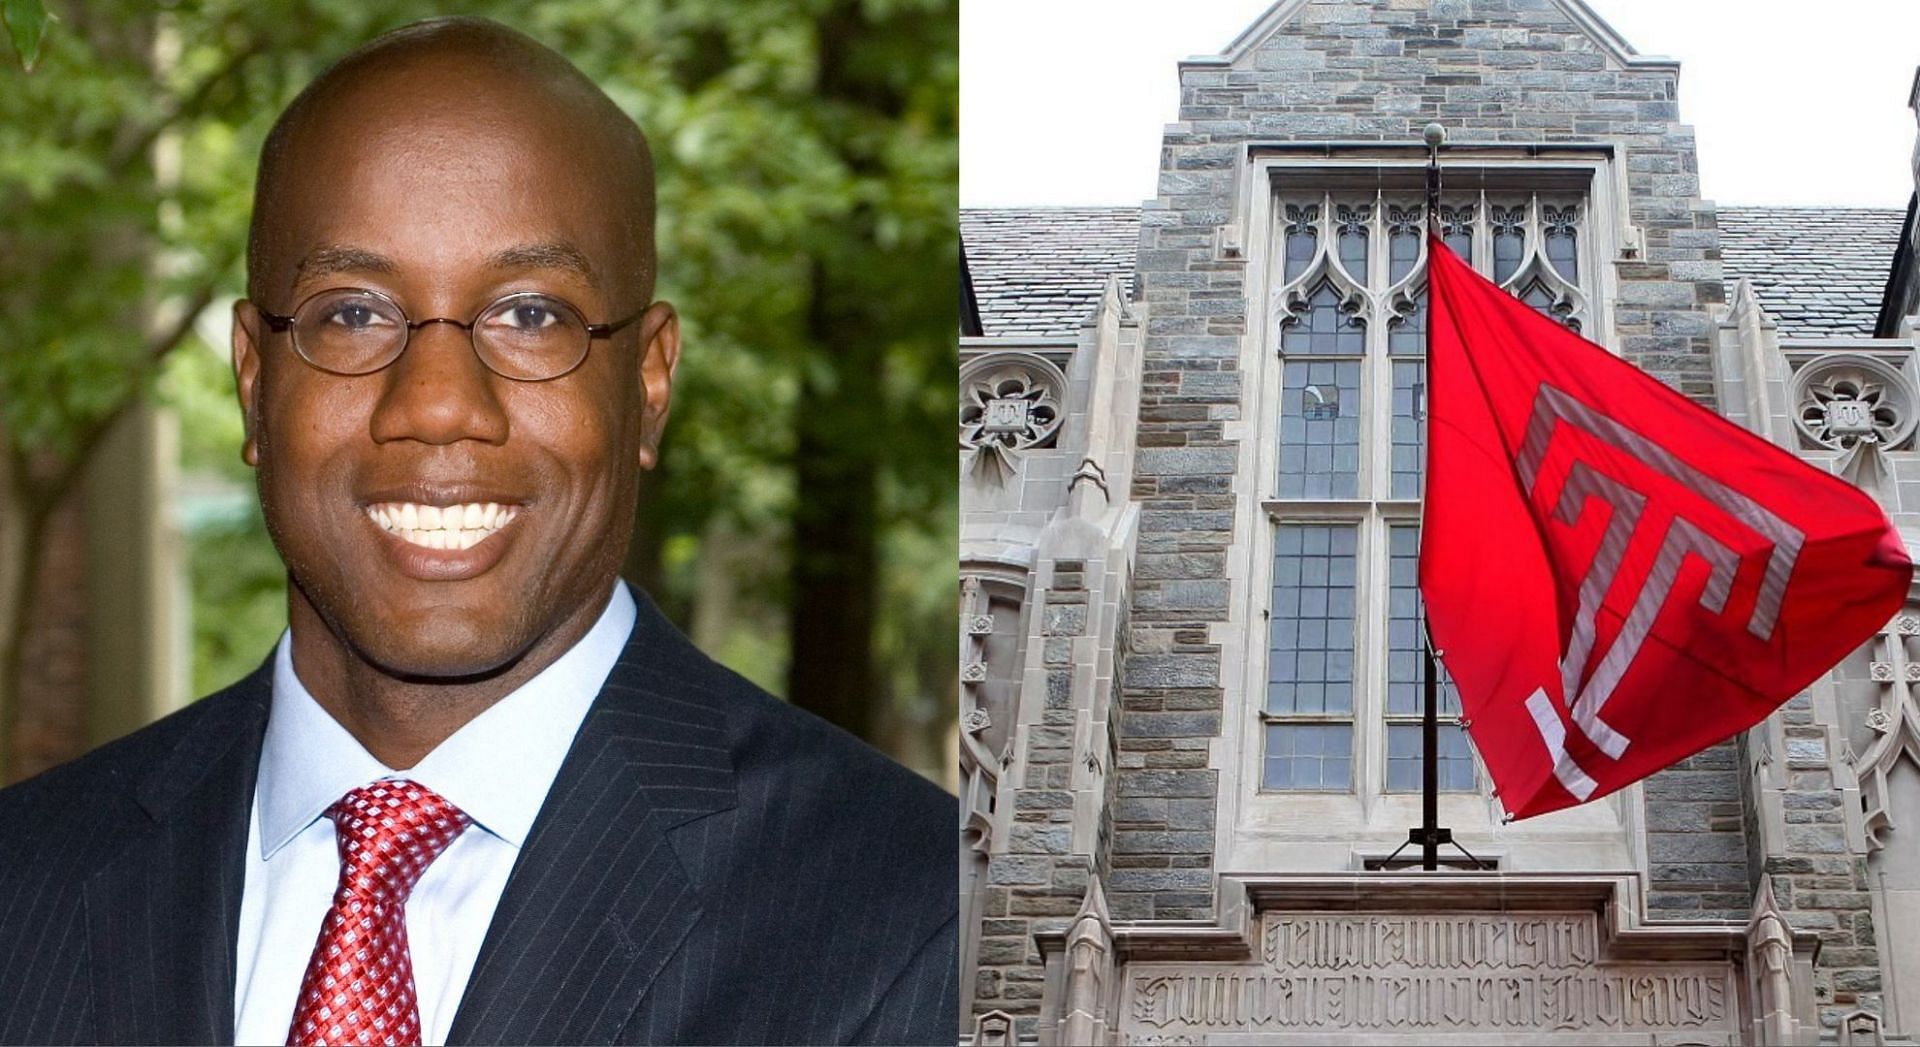 Temple University President Jason Wingard resigned from role effective March 31 (Image via Daisy Age Feminist/Twitter and Getty Images)